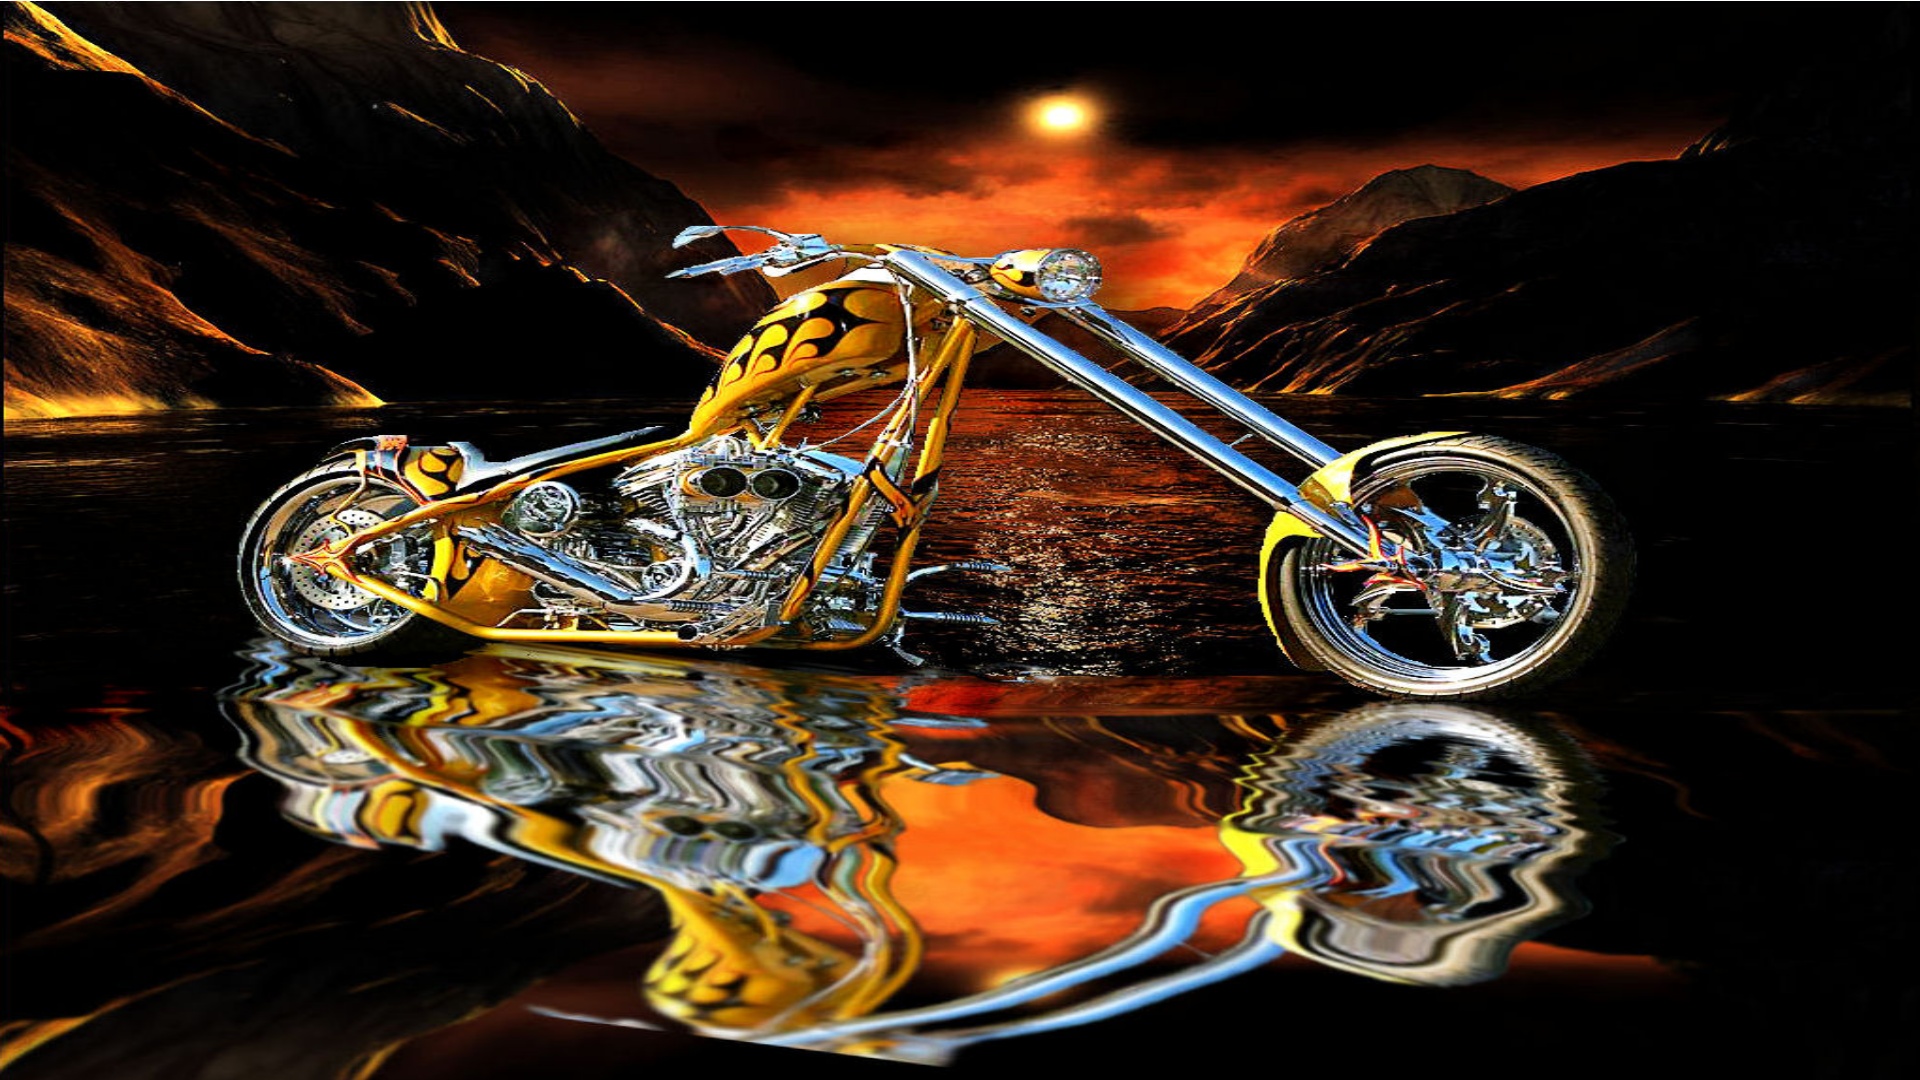 Free HD Choppers wallpapers West Cost Choppers theme bikes Amazing